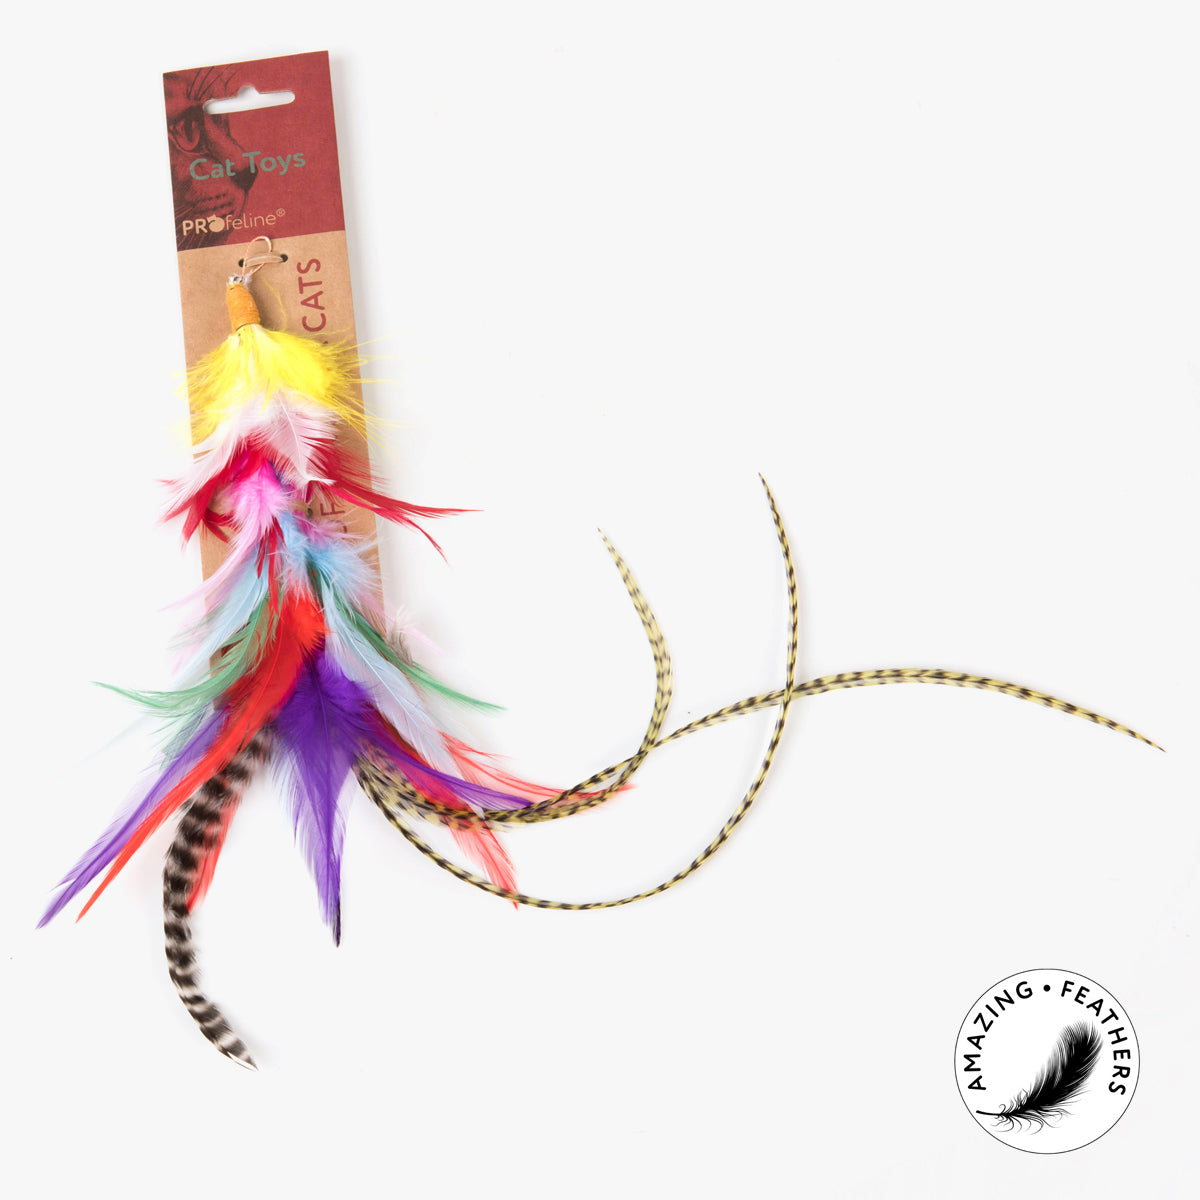 Profeline Brazil Kitten Toy, Handmade From Colourful Feathers | at Made Moggie